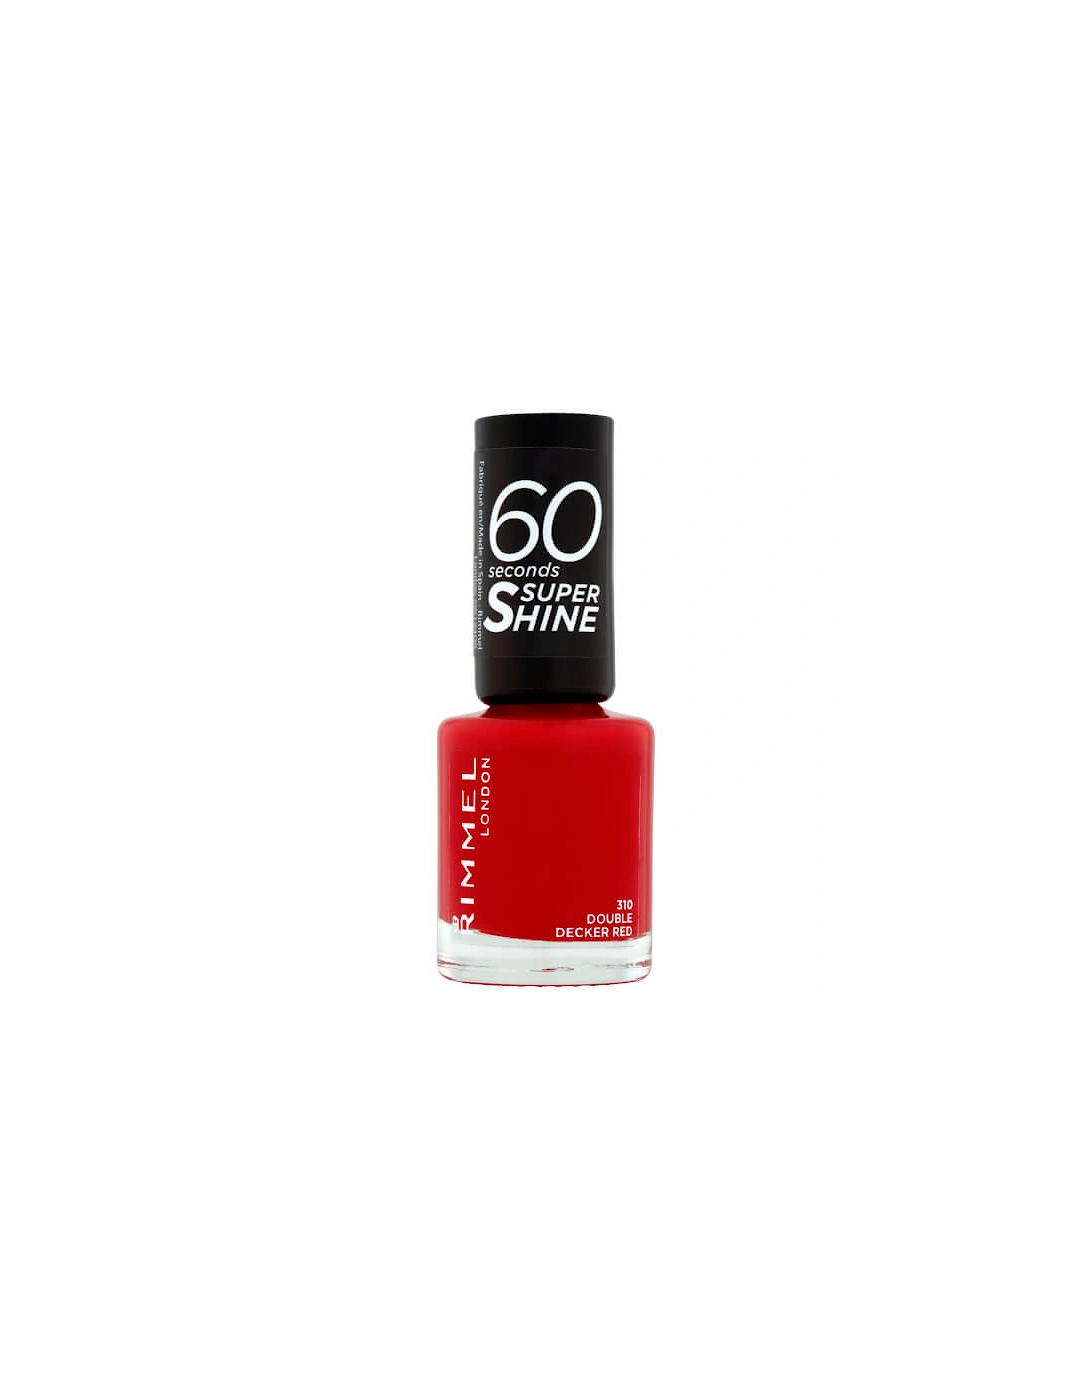 60 Seconds Super Shine Nail Polish - Double Decker Red, 2 of 1